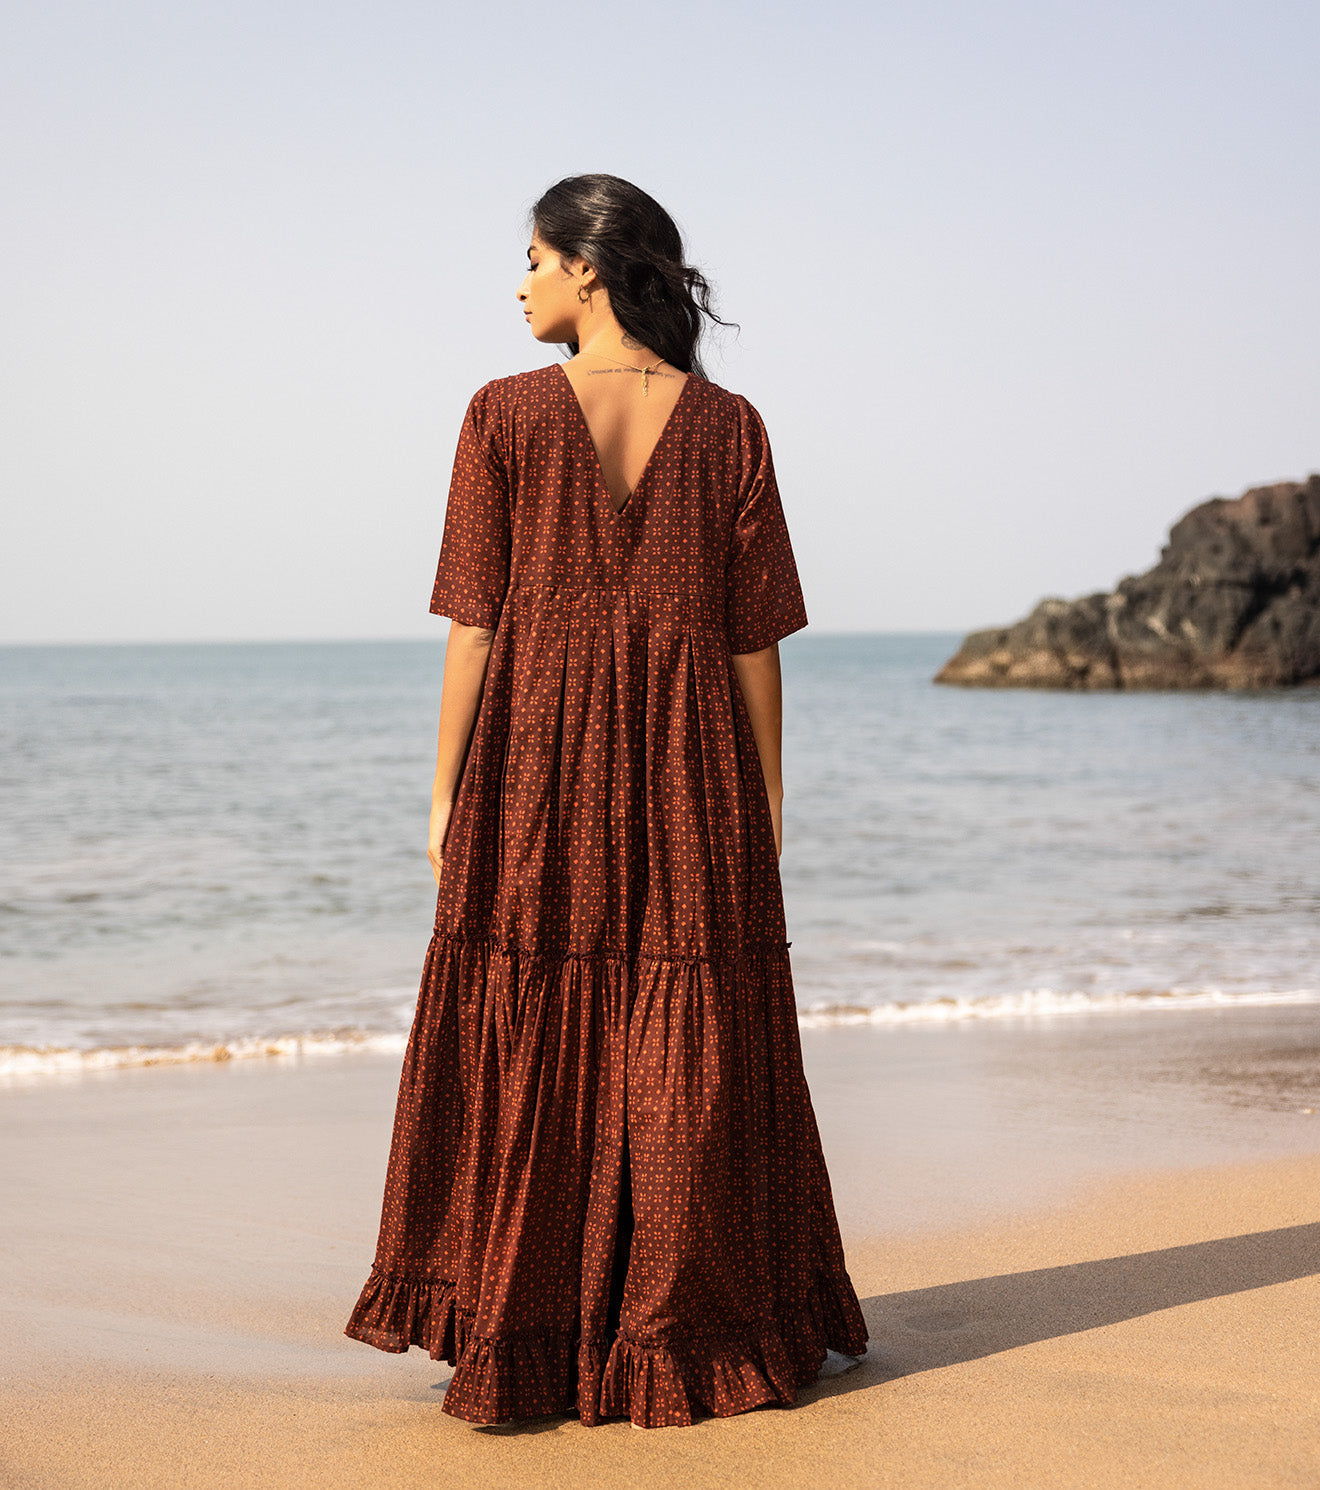 Red Maxi Dress: When dresses make our inner child come out 🍁 at Kamakhyaa by Khara Kapas. This item is Cotton, Maxi Dresses, Natural, Oh Carol, Red, Regular Fit, Resort Wear, Solids, Tiered Dresses, Womenswear